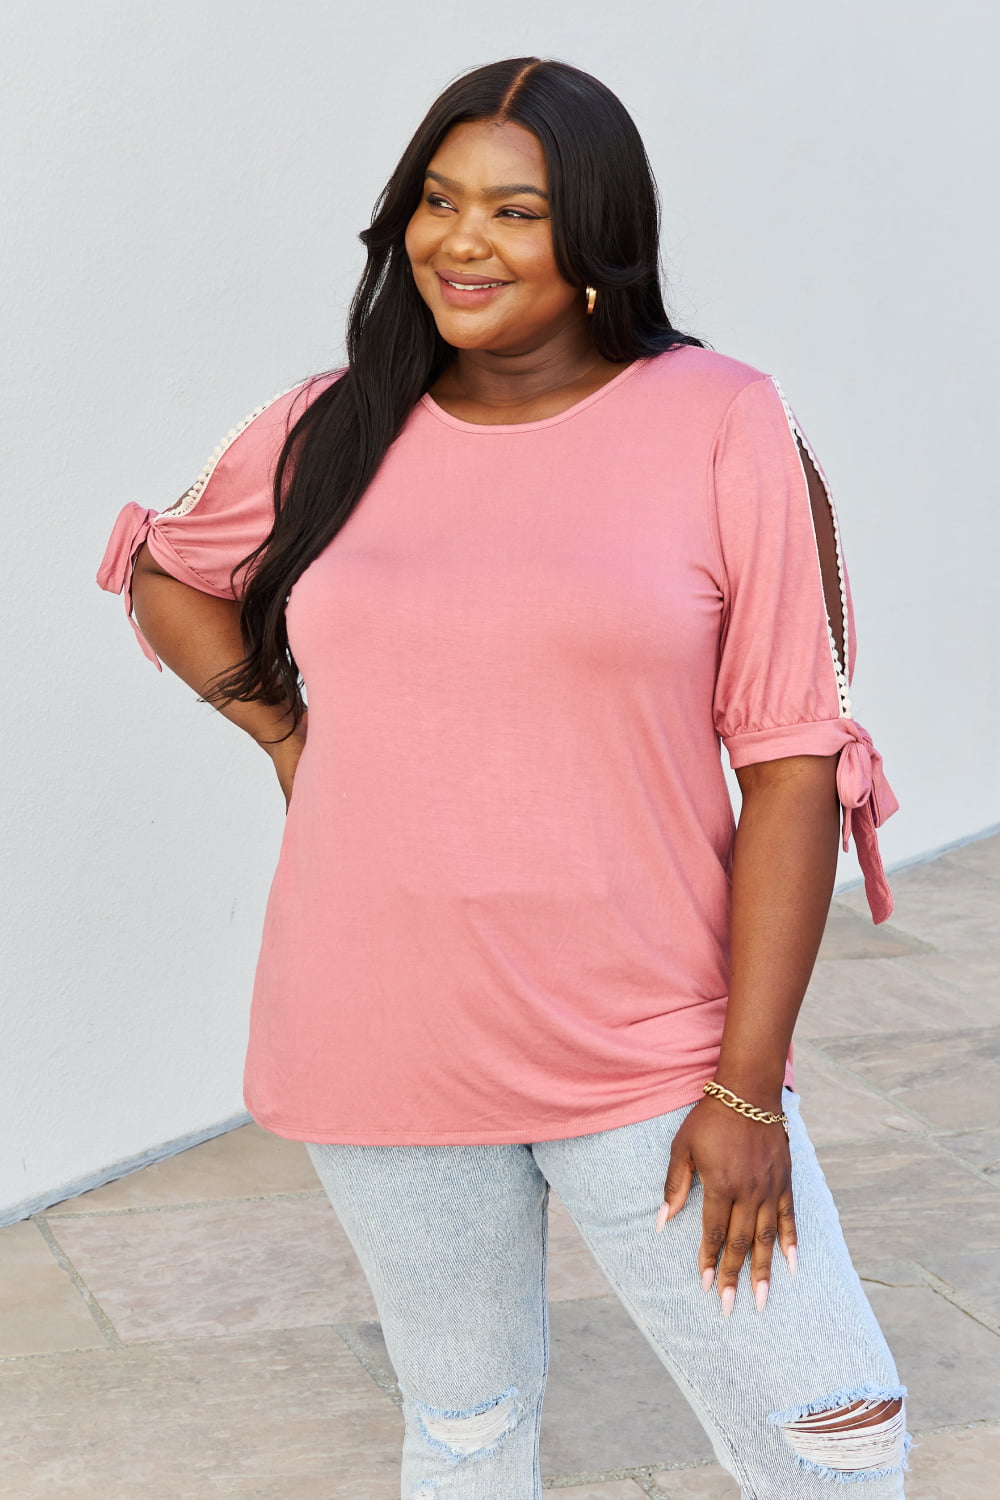 Celeste Full Size Solid Top With Arm Detail in Coral